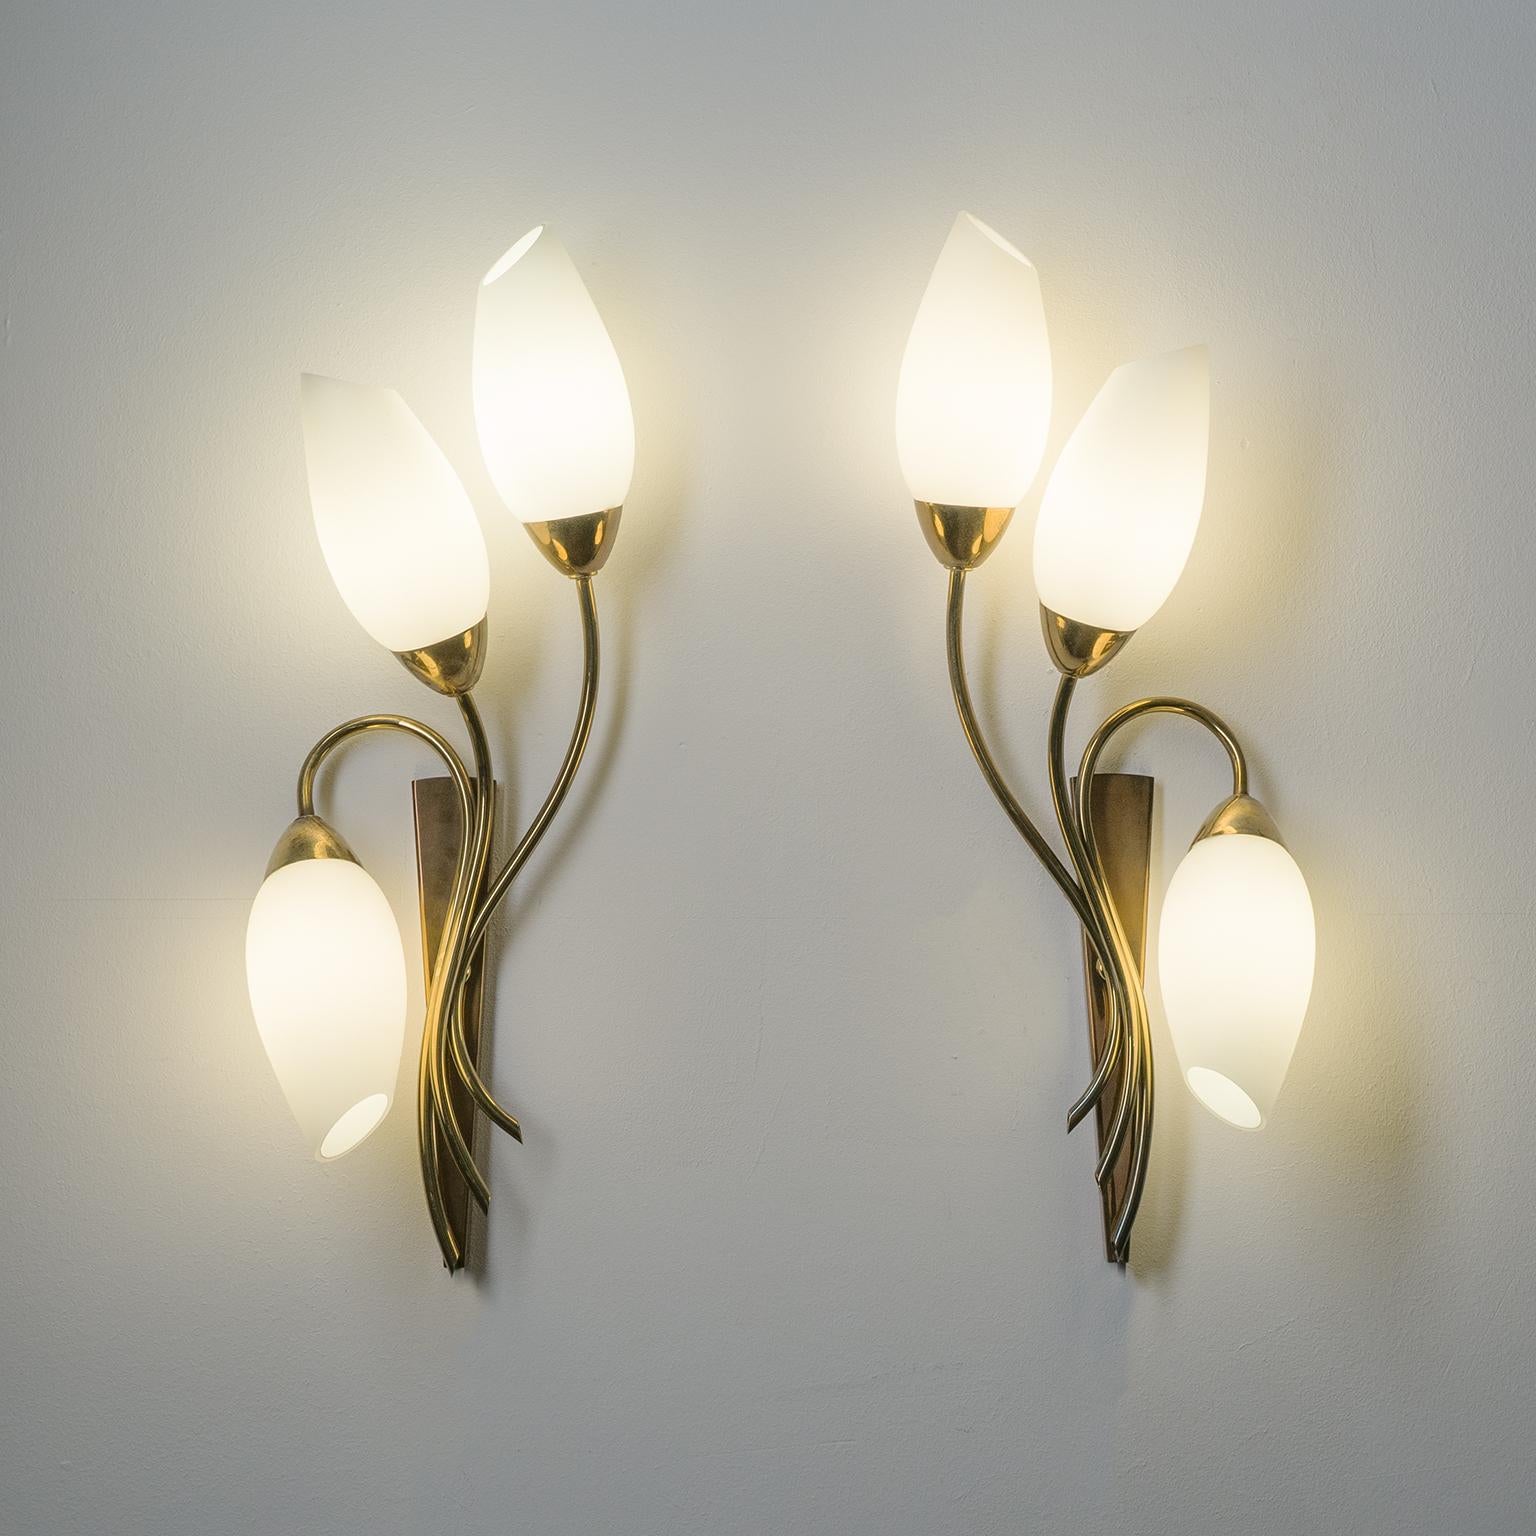 Mid-Century Modern Large French Wall Lights, 1950s, Brass and Satin Glass